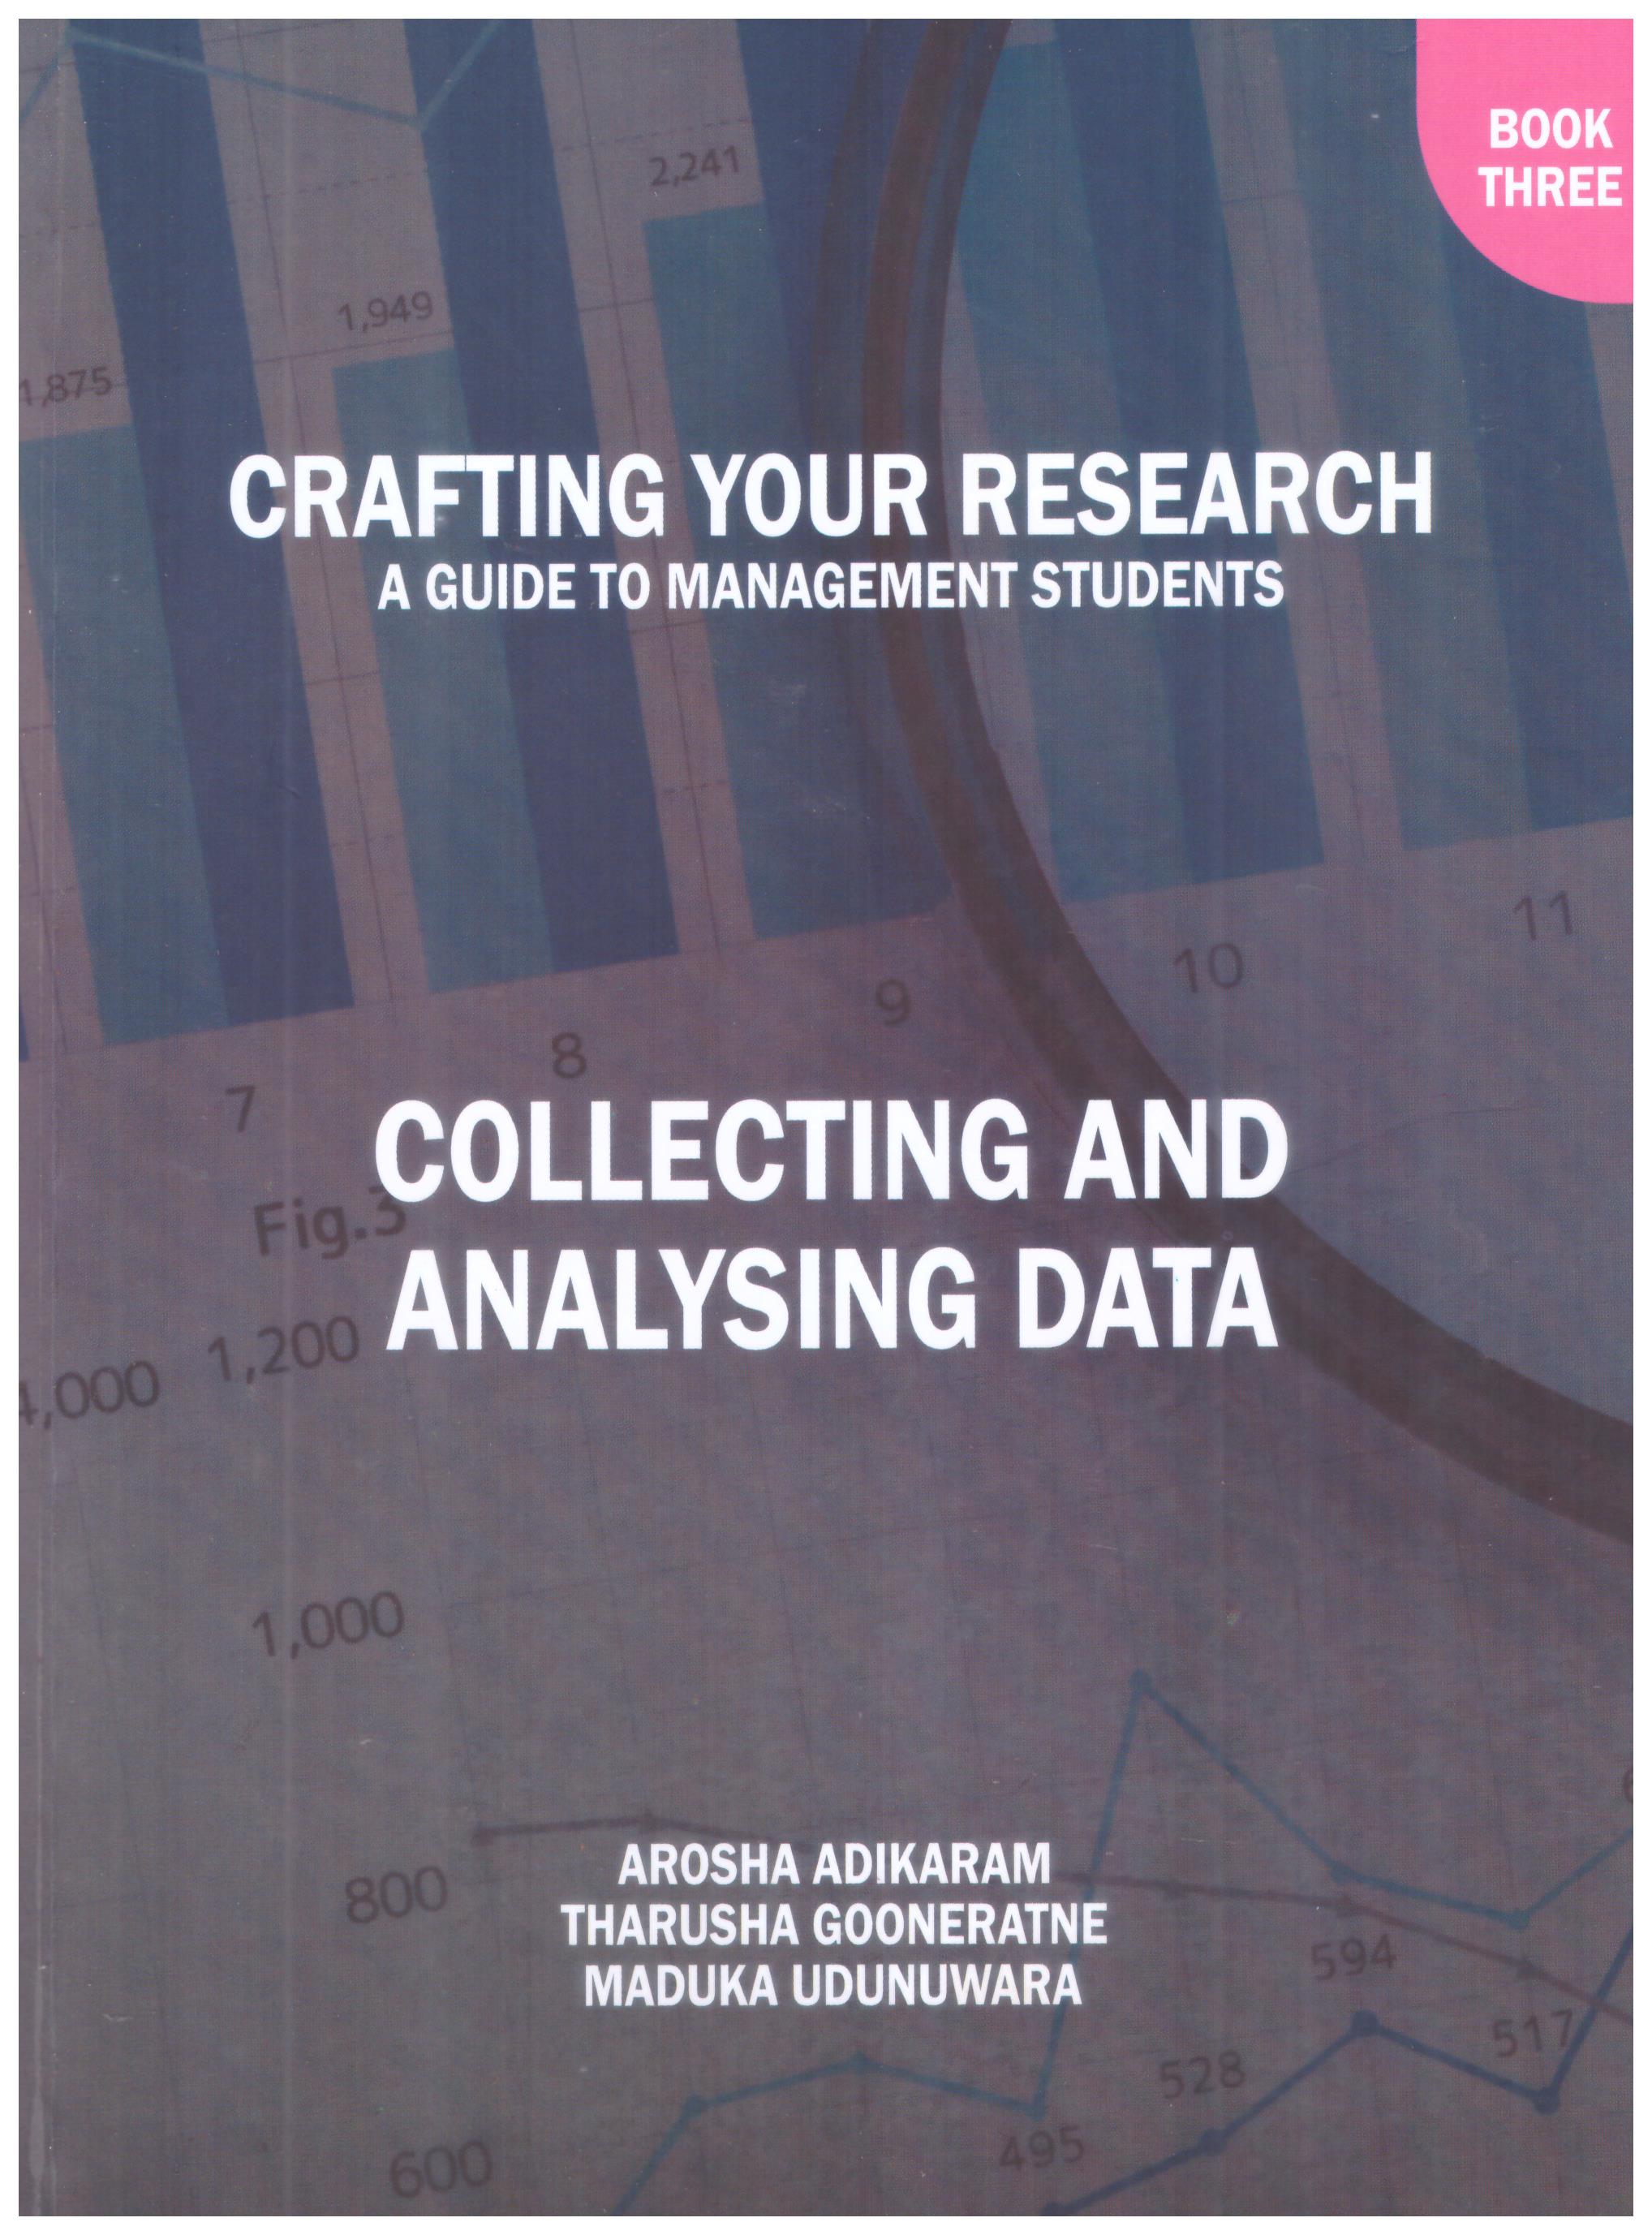 Crafting Your Research : A Guide to Management Students : Collecting And Analysing Data Book Three